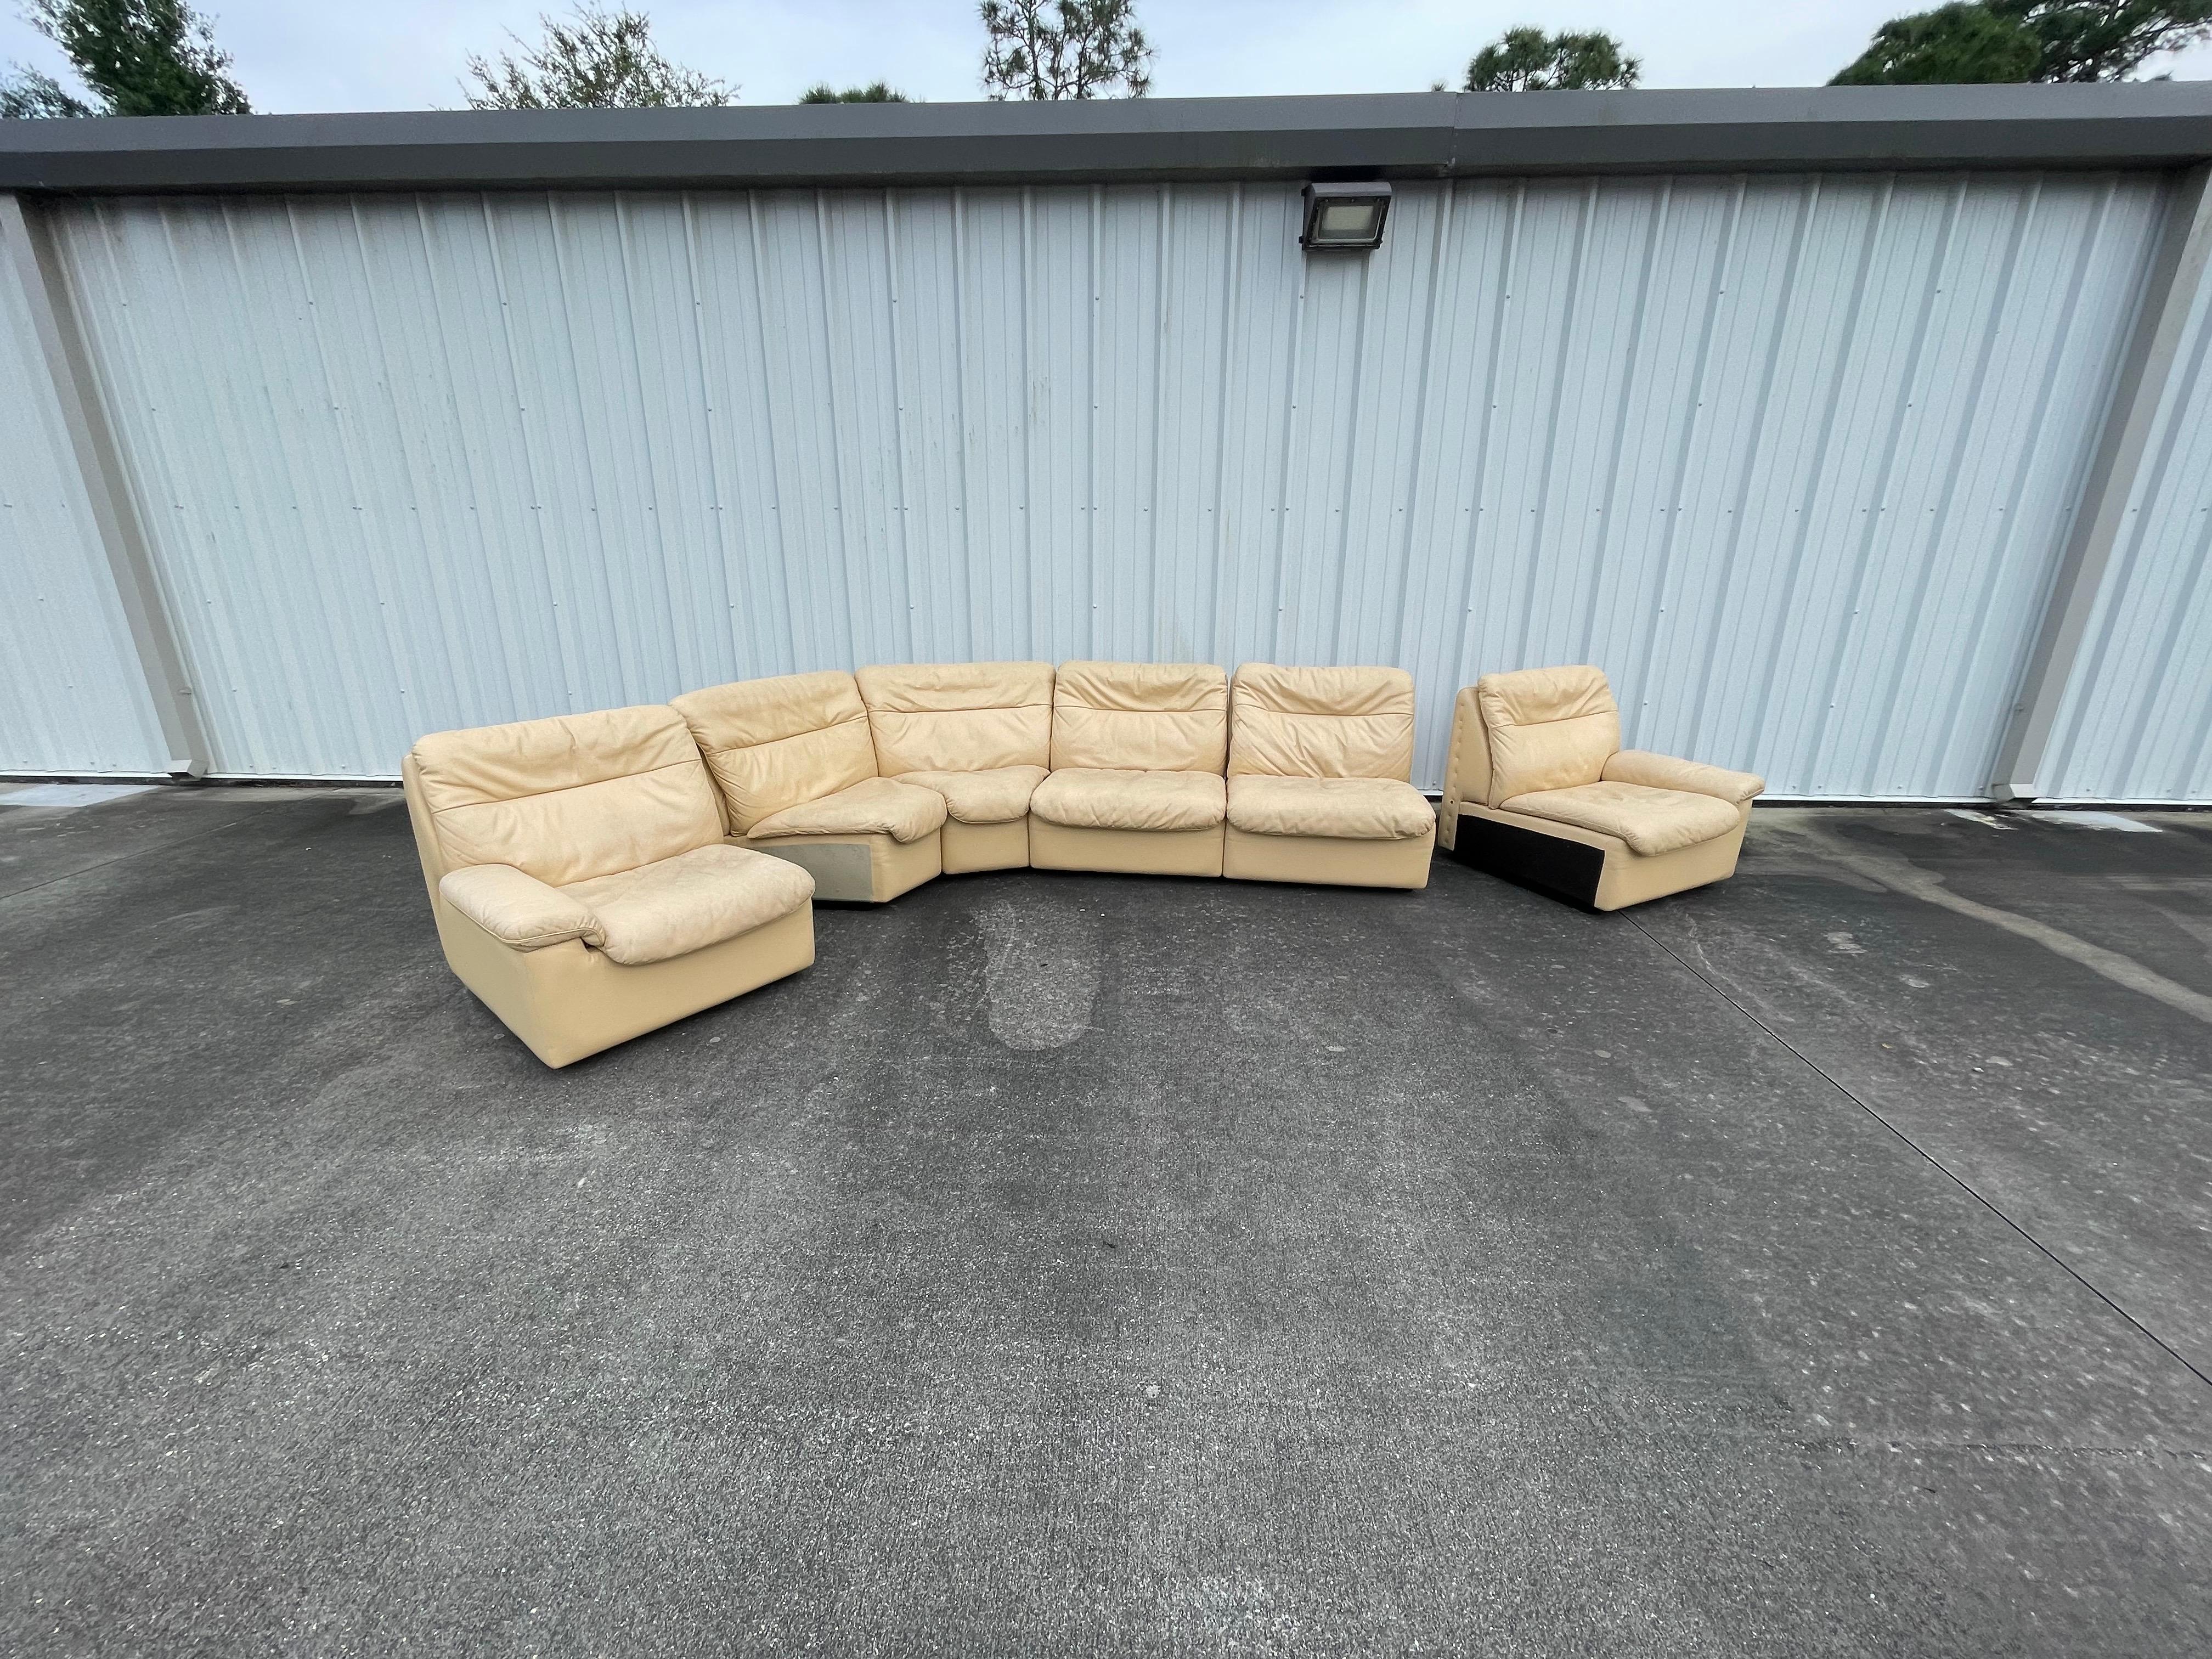 1970s De Sede Switzerland Modular Leather Sofa Sectional Couch DS 63 For Sale 3